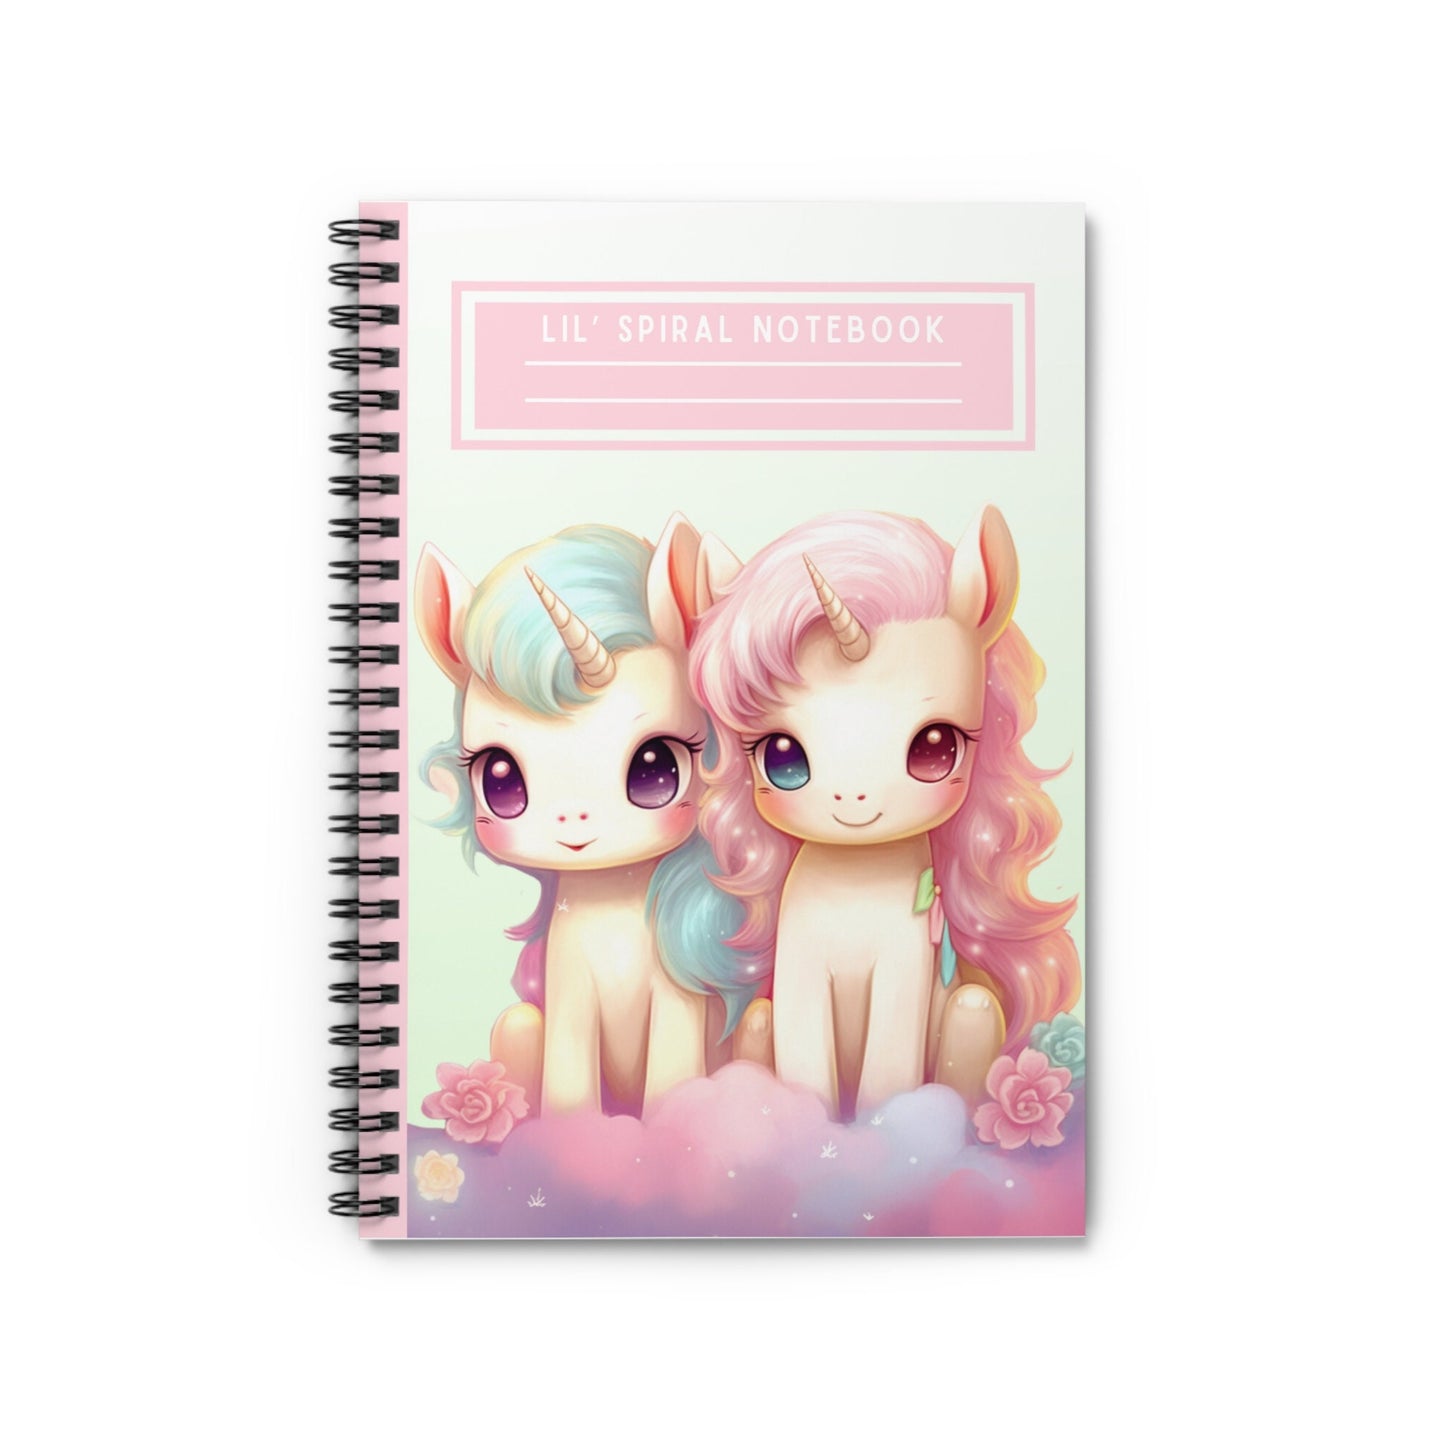 Unicorn Spiral Notebook Ruled Lines Journal Notebook Stationary Gift Durable Cover 6x8 Inches